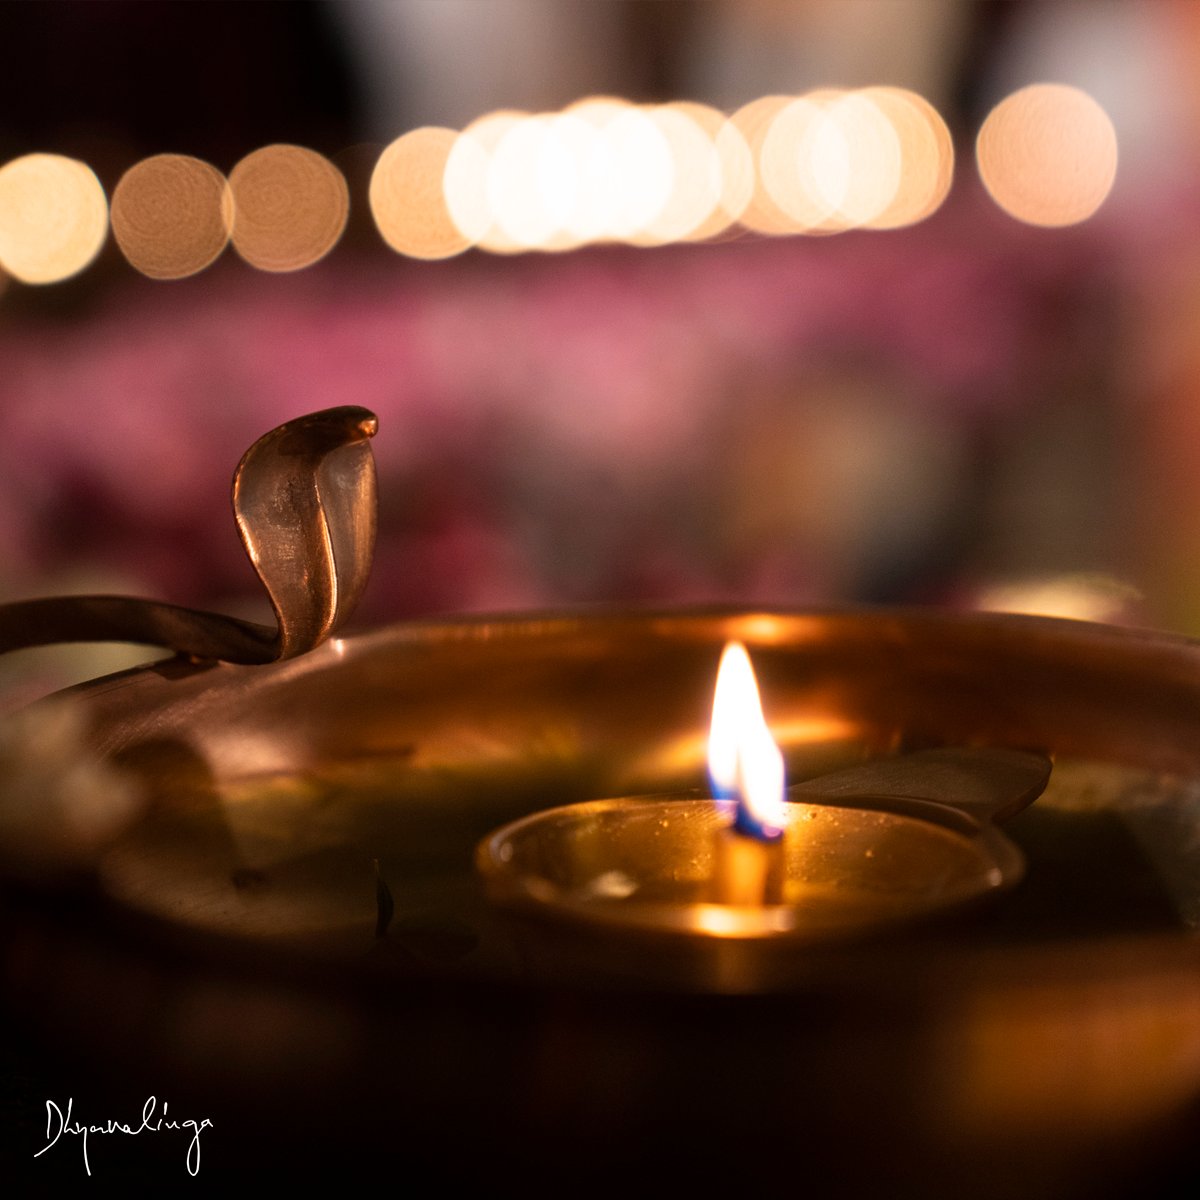 Celebration of the 24th anniversary of Dhyanalinga Consecration at the Isha Yoga Center was a special one. The presence of fresh flowers symbolized beauty, blossoming and a heartfelt offering, infusing the air with a fragrant and visually enchanting ambiance. The gentle…